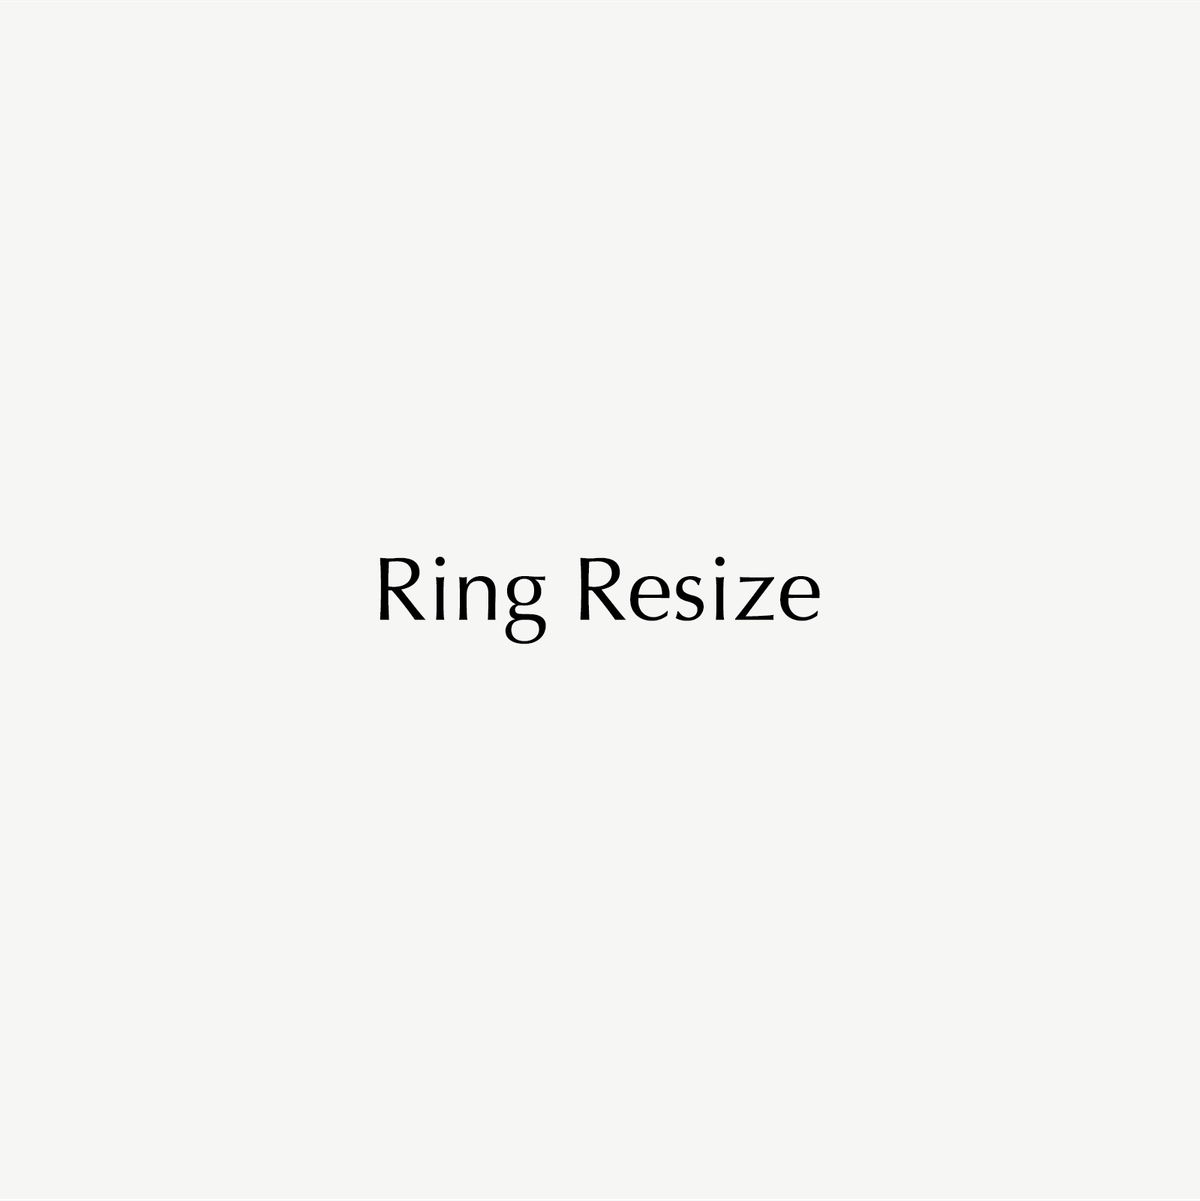 You can request to have your ring resized here